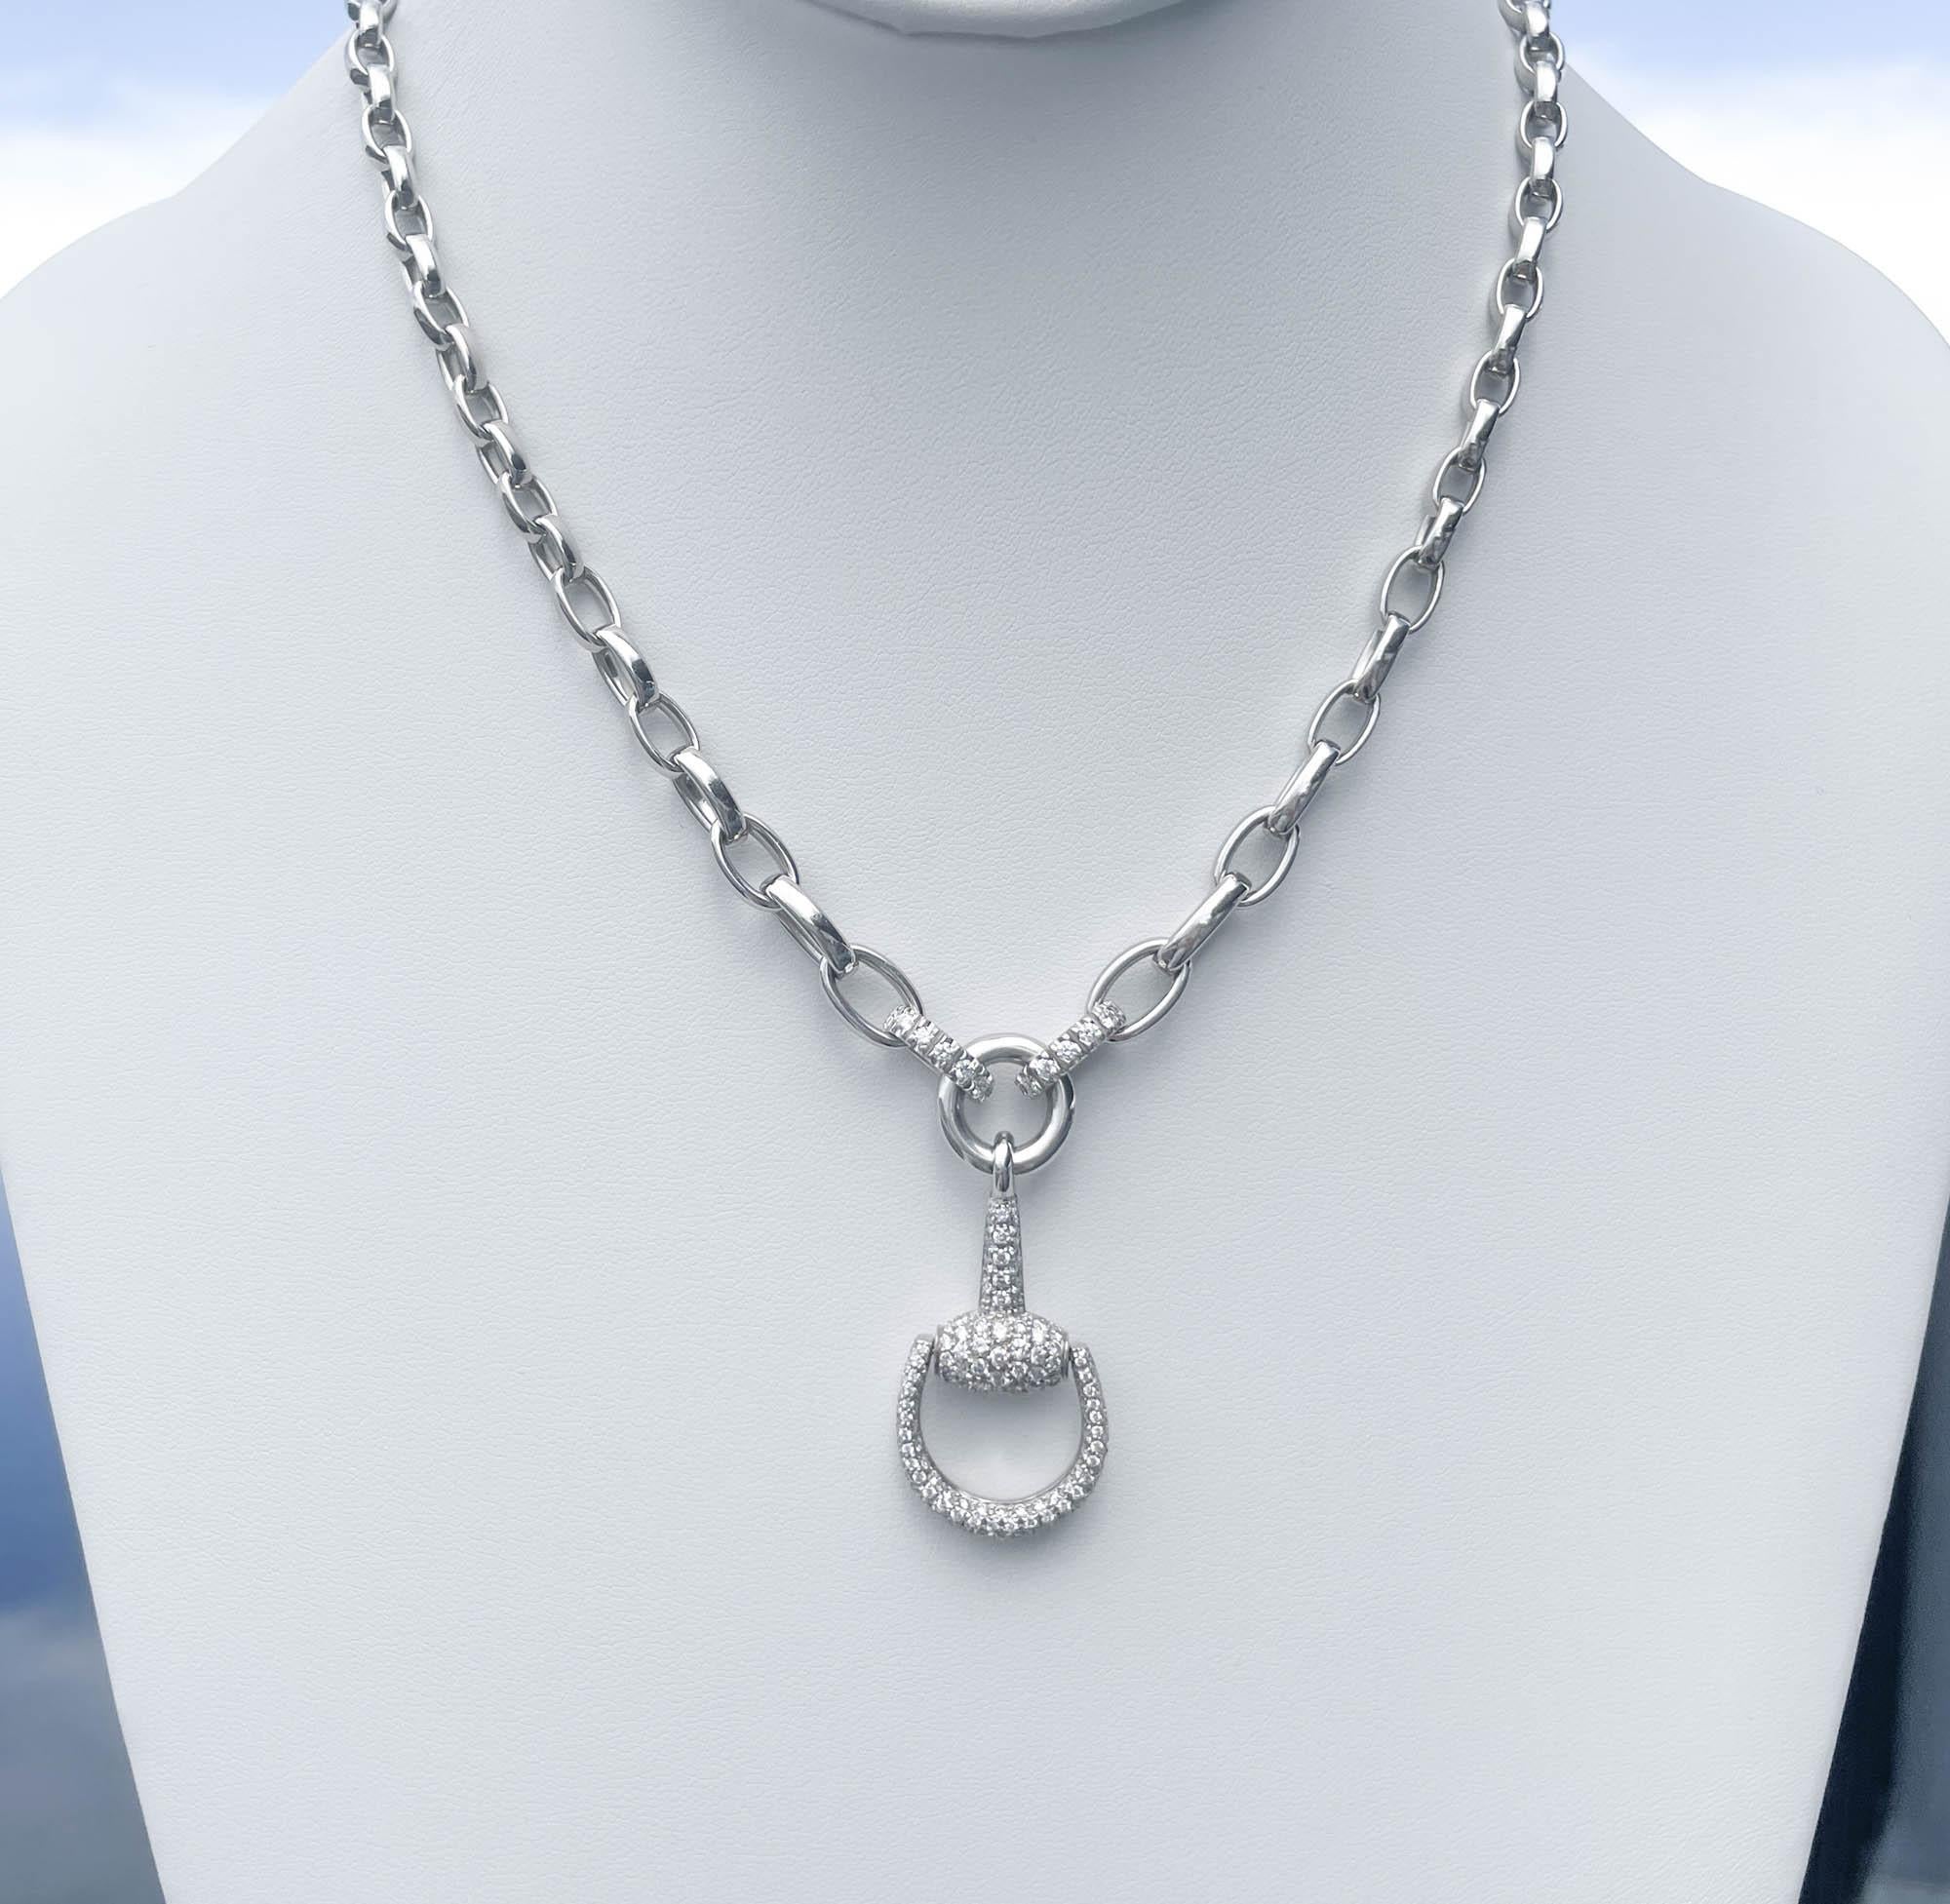 18k White Gold Diamond Horsebit Necklace with pave set small round brilliant diamonds; estimated total weight is approx. 2.04ct (F-G, VS overall). The necklace is 17.75 inches; the horsebit pendant is 2 inches long. Total weight of the necklace is